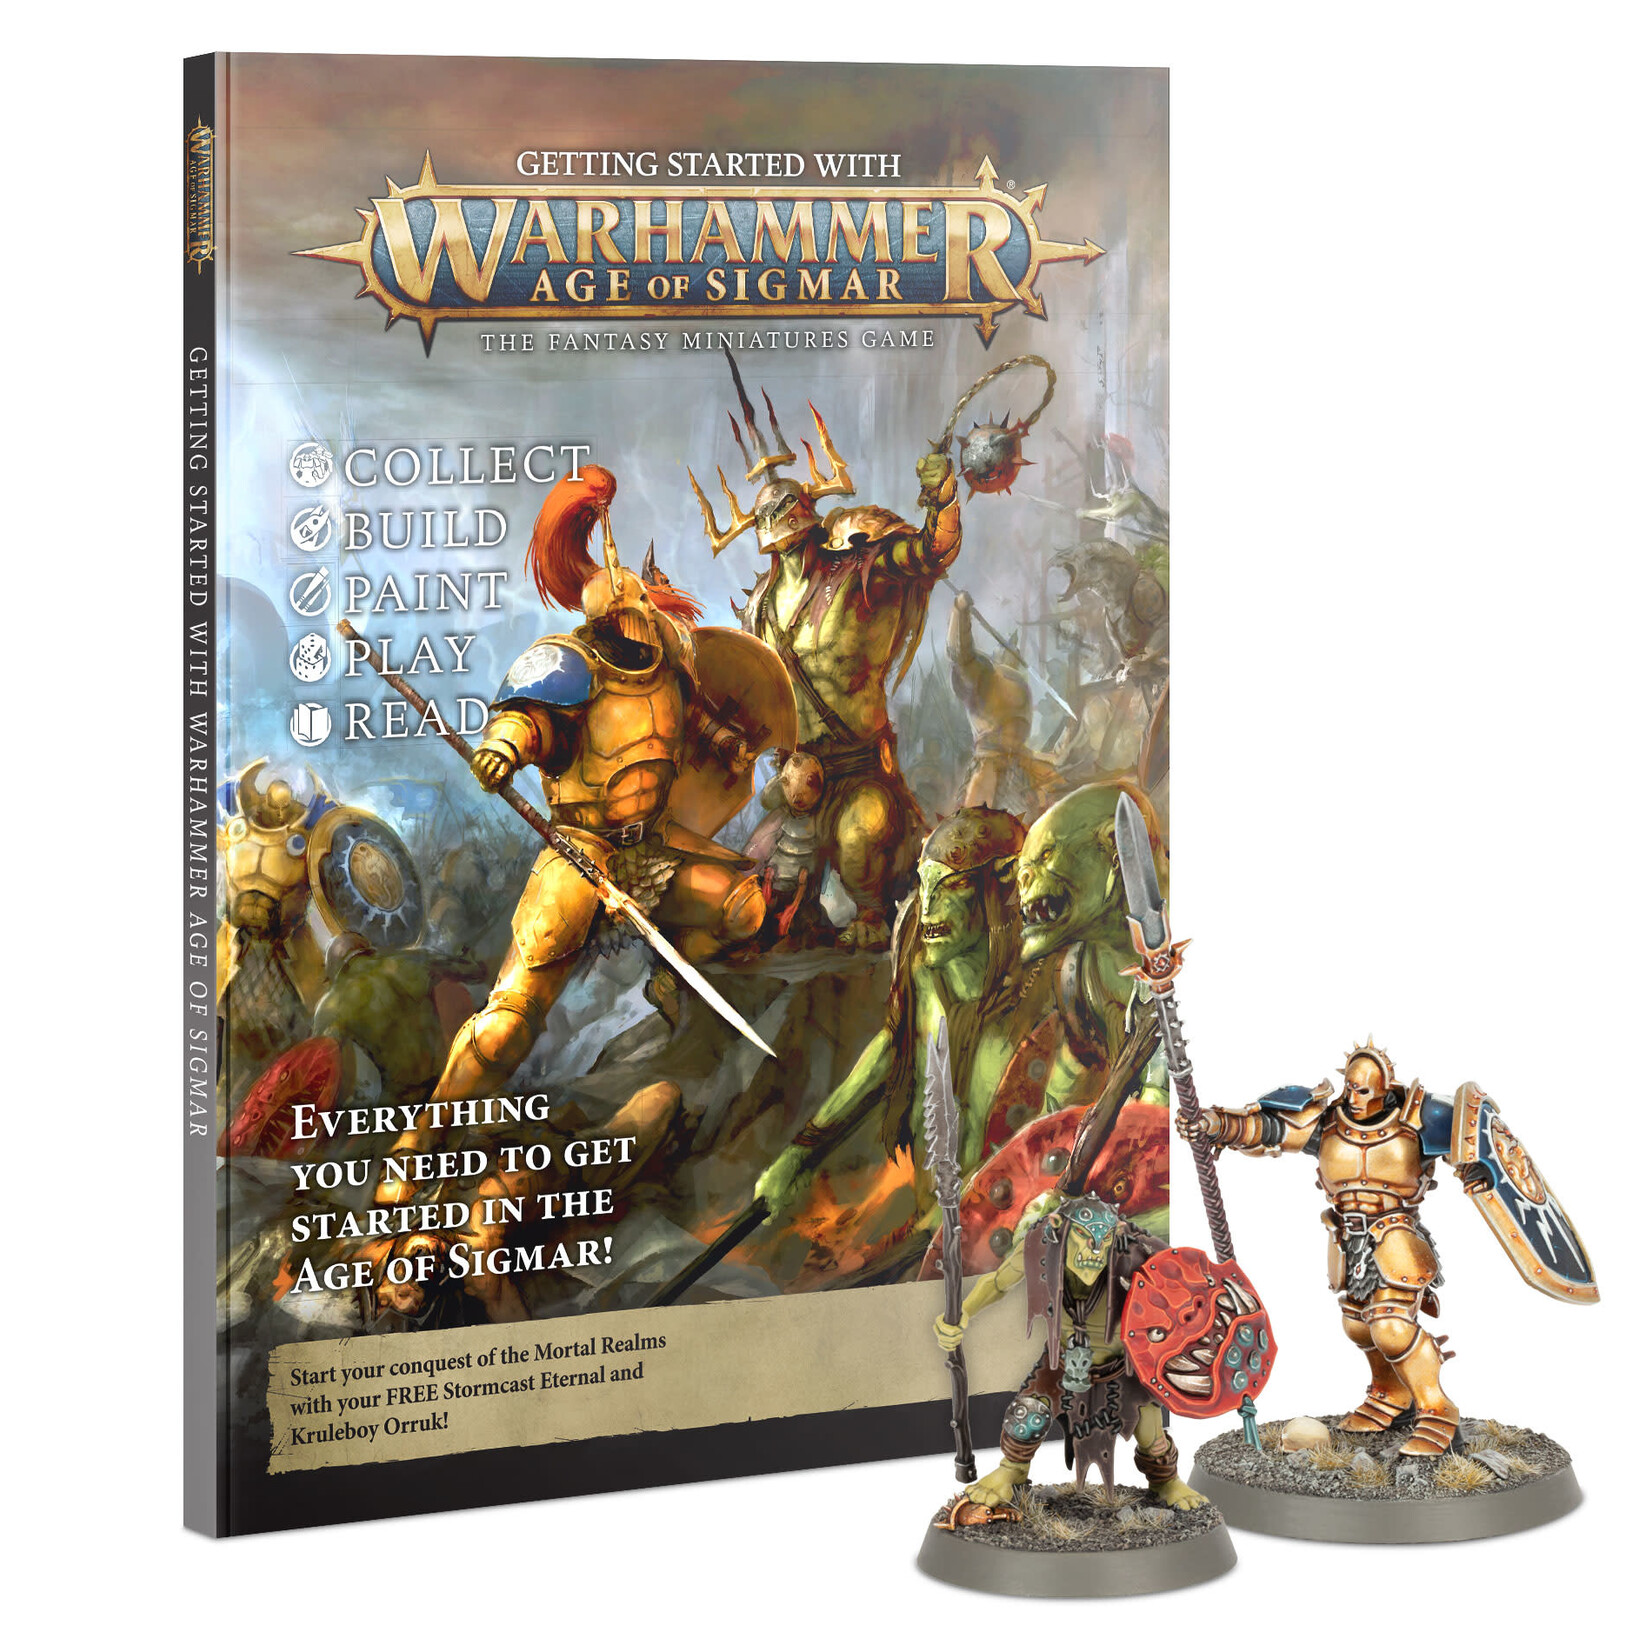 Games Workshop GETTING STARTED WITH AGE OF SIGMAR (ENG)